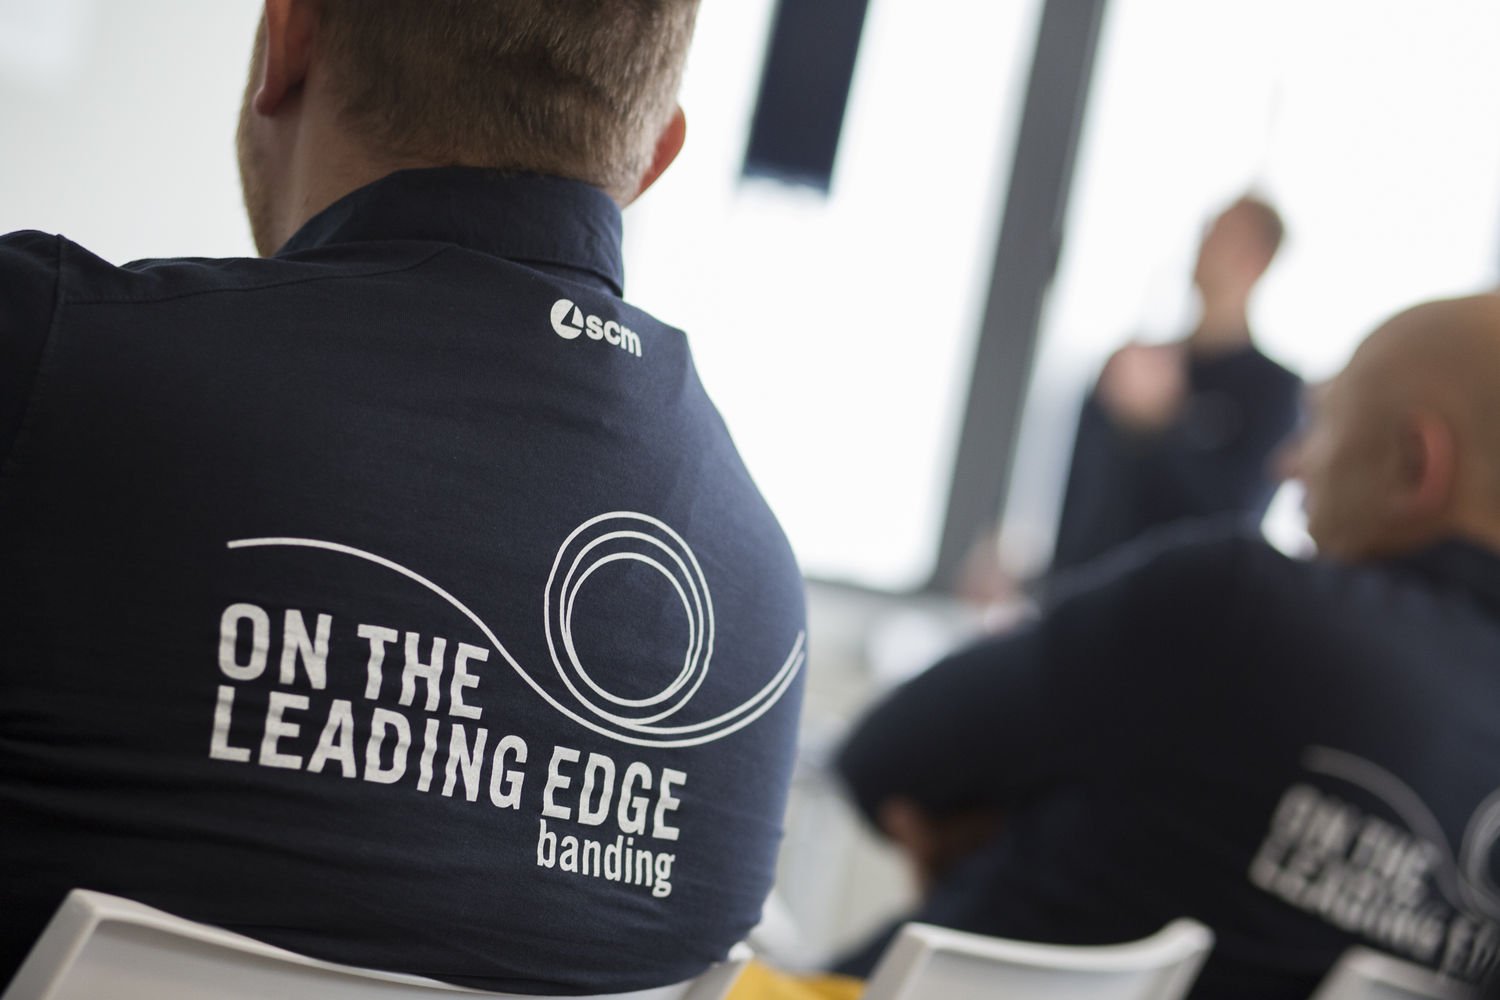 “On the Leading Edgebanding”: a preview of excellence for "batch 1" edgebanding with a Sales Training Day.